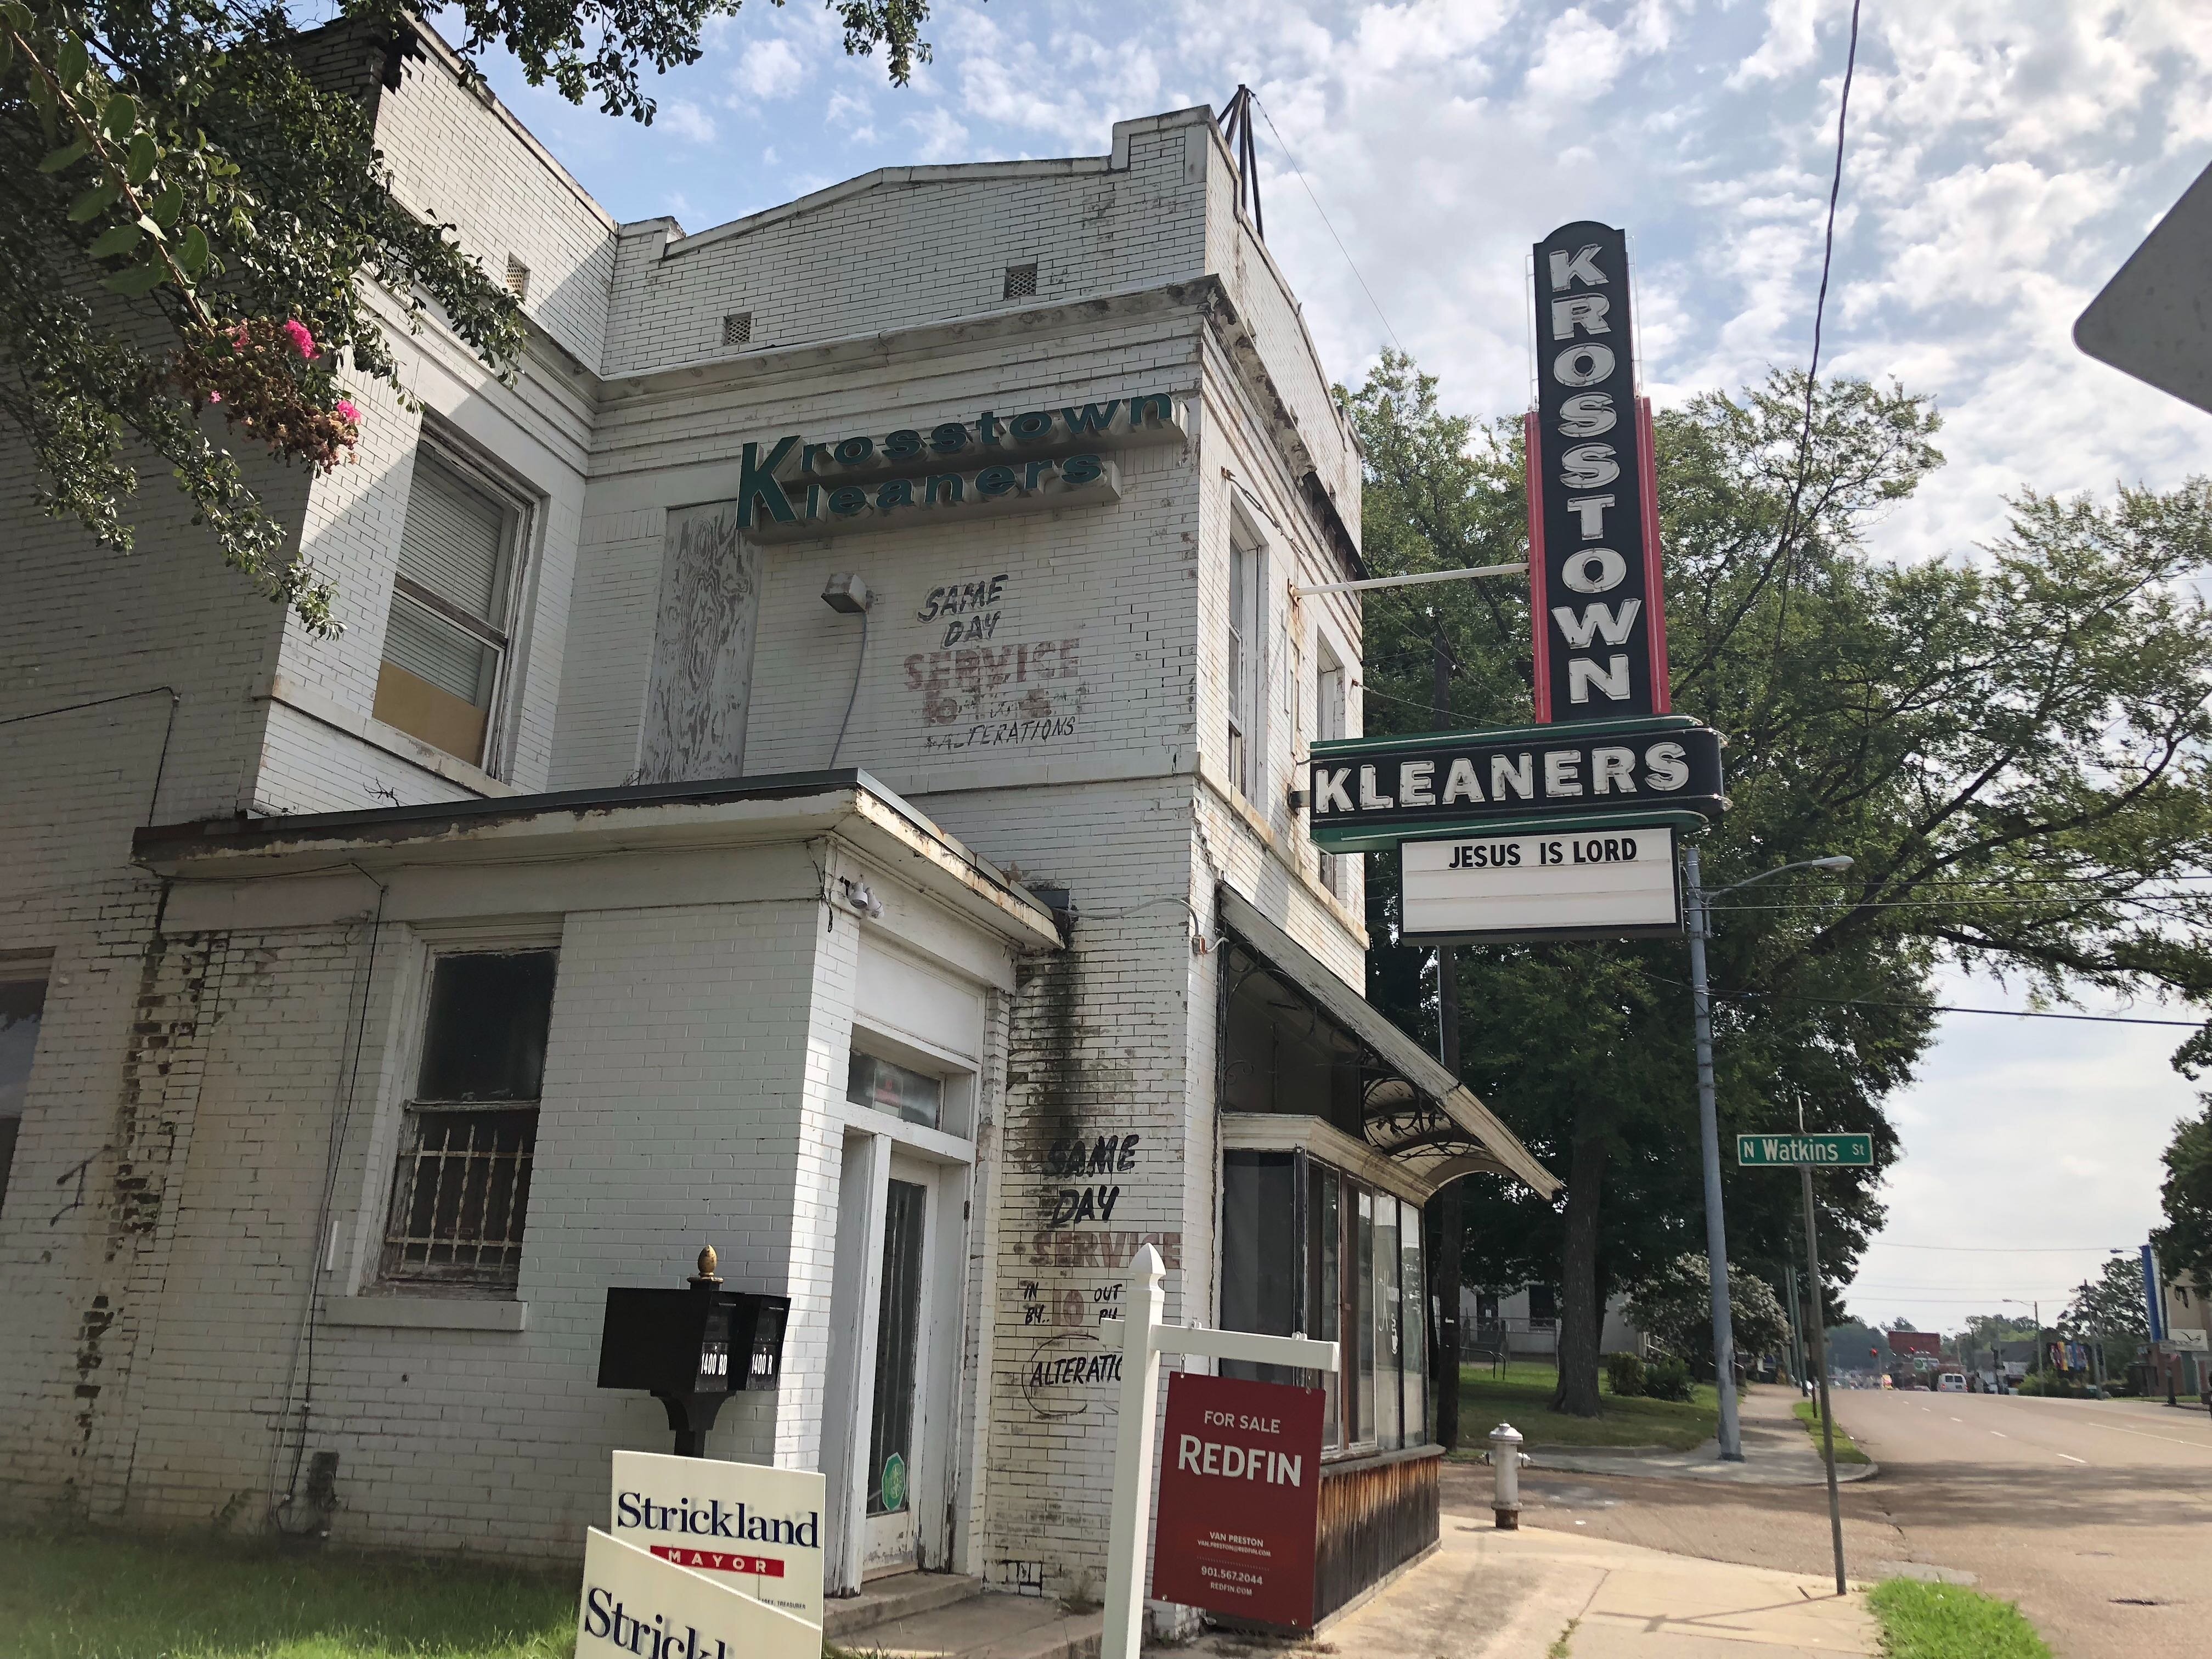 Krosstown Kleaners ended operations roughly five years ago, but its iconic signage still adorn the building's exterior at 1400 Madison Avenue. (AJ Dugger III)